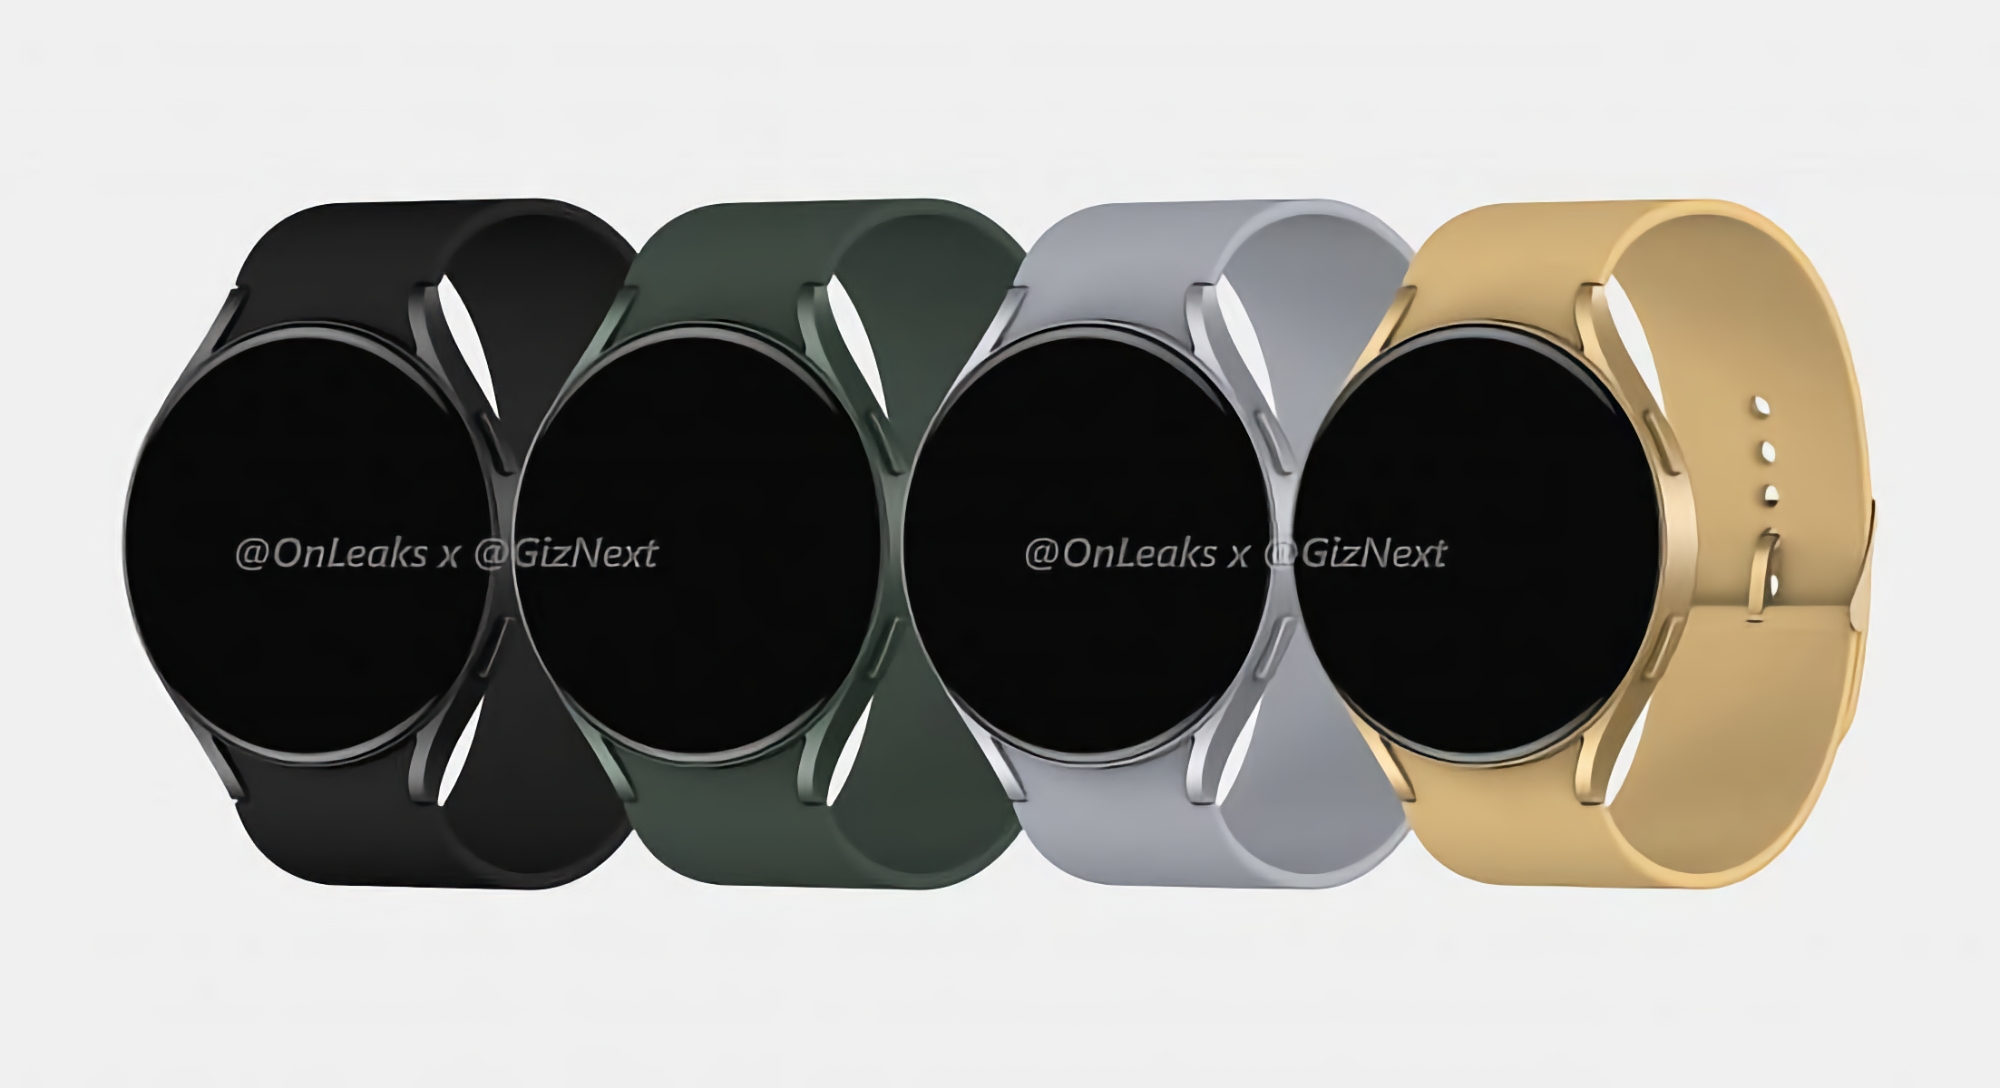 This is what Samsung Galaxy Watch Active 4 will look like with Wear OS on board